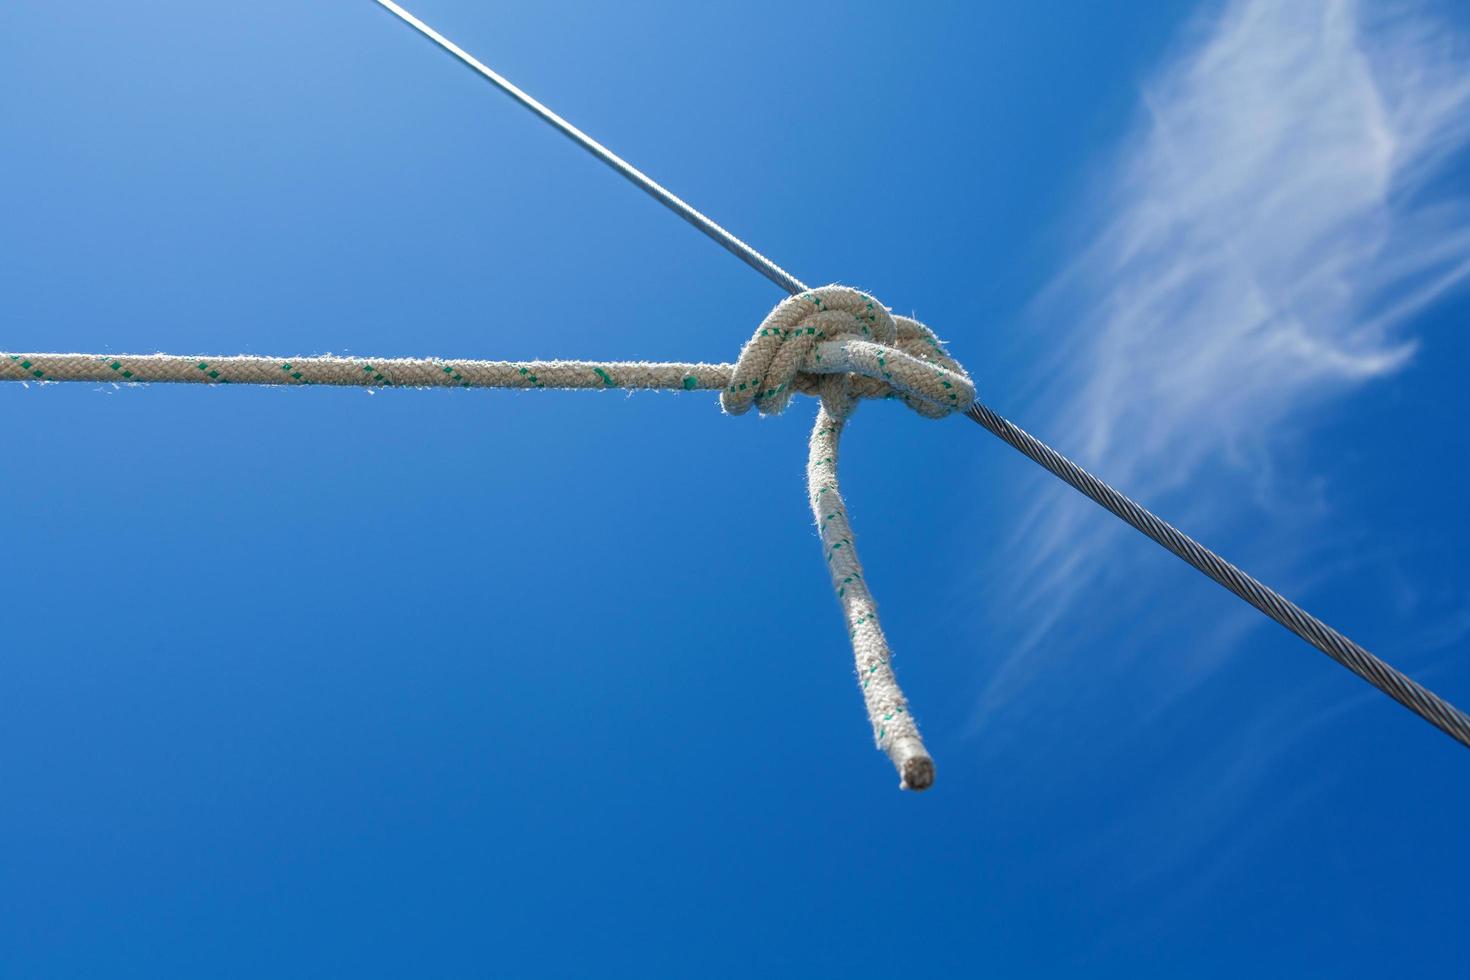 Knot in rope photo